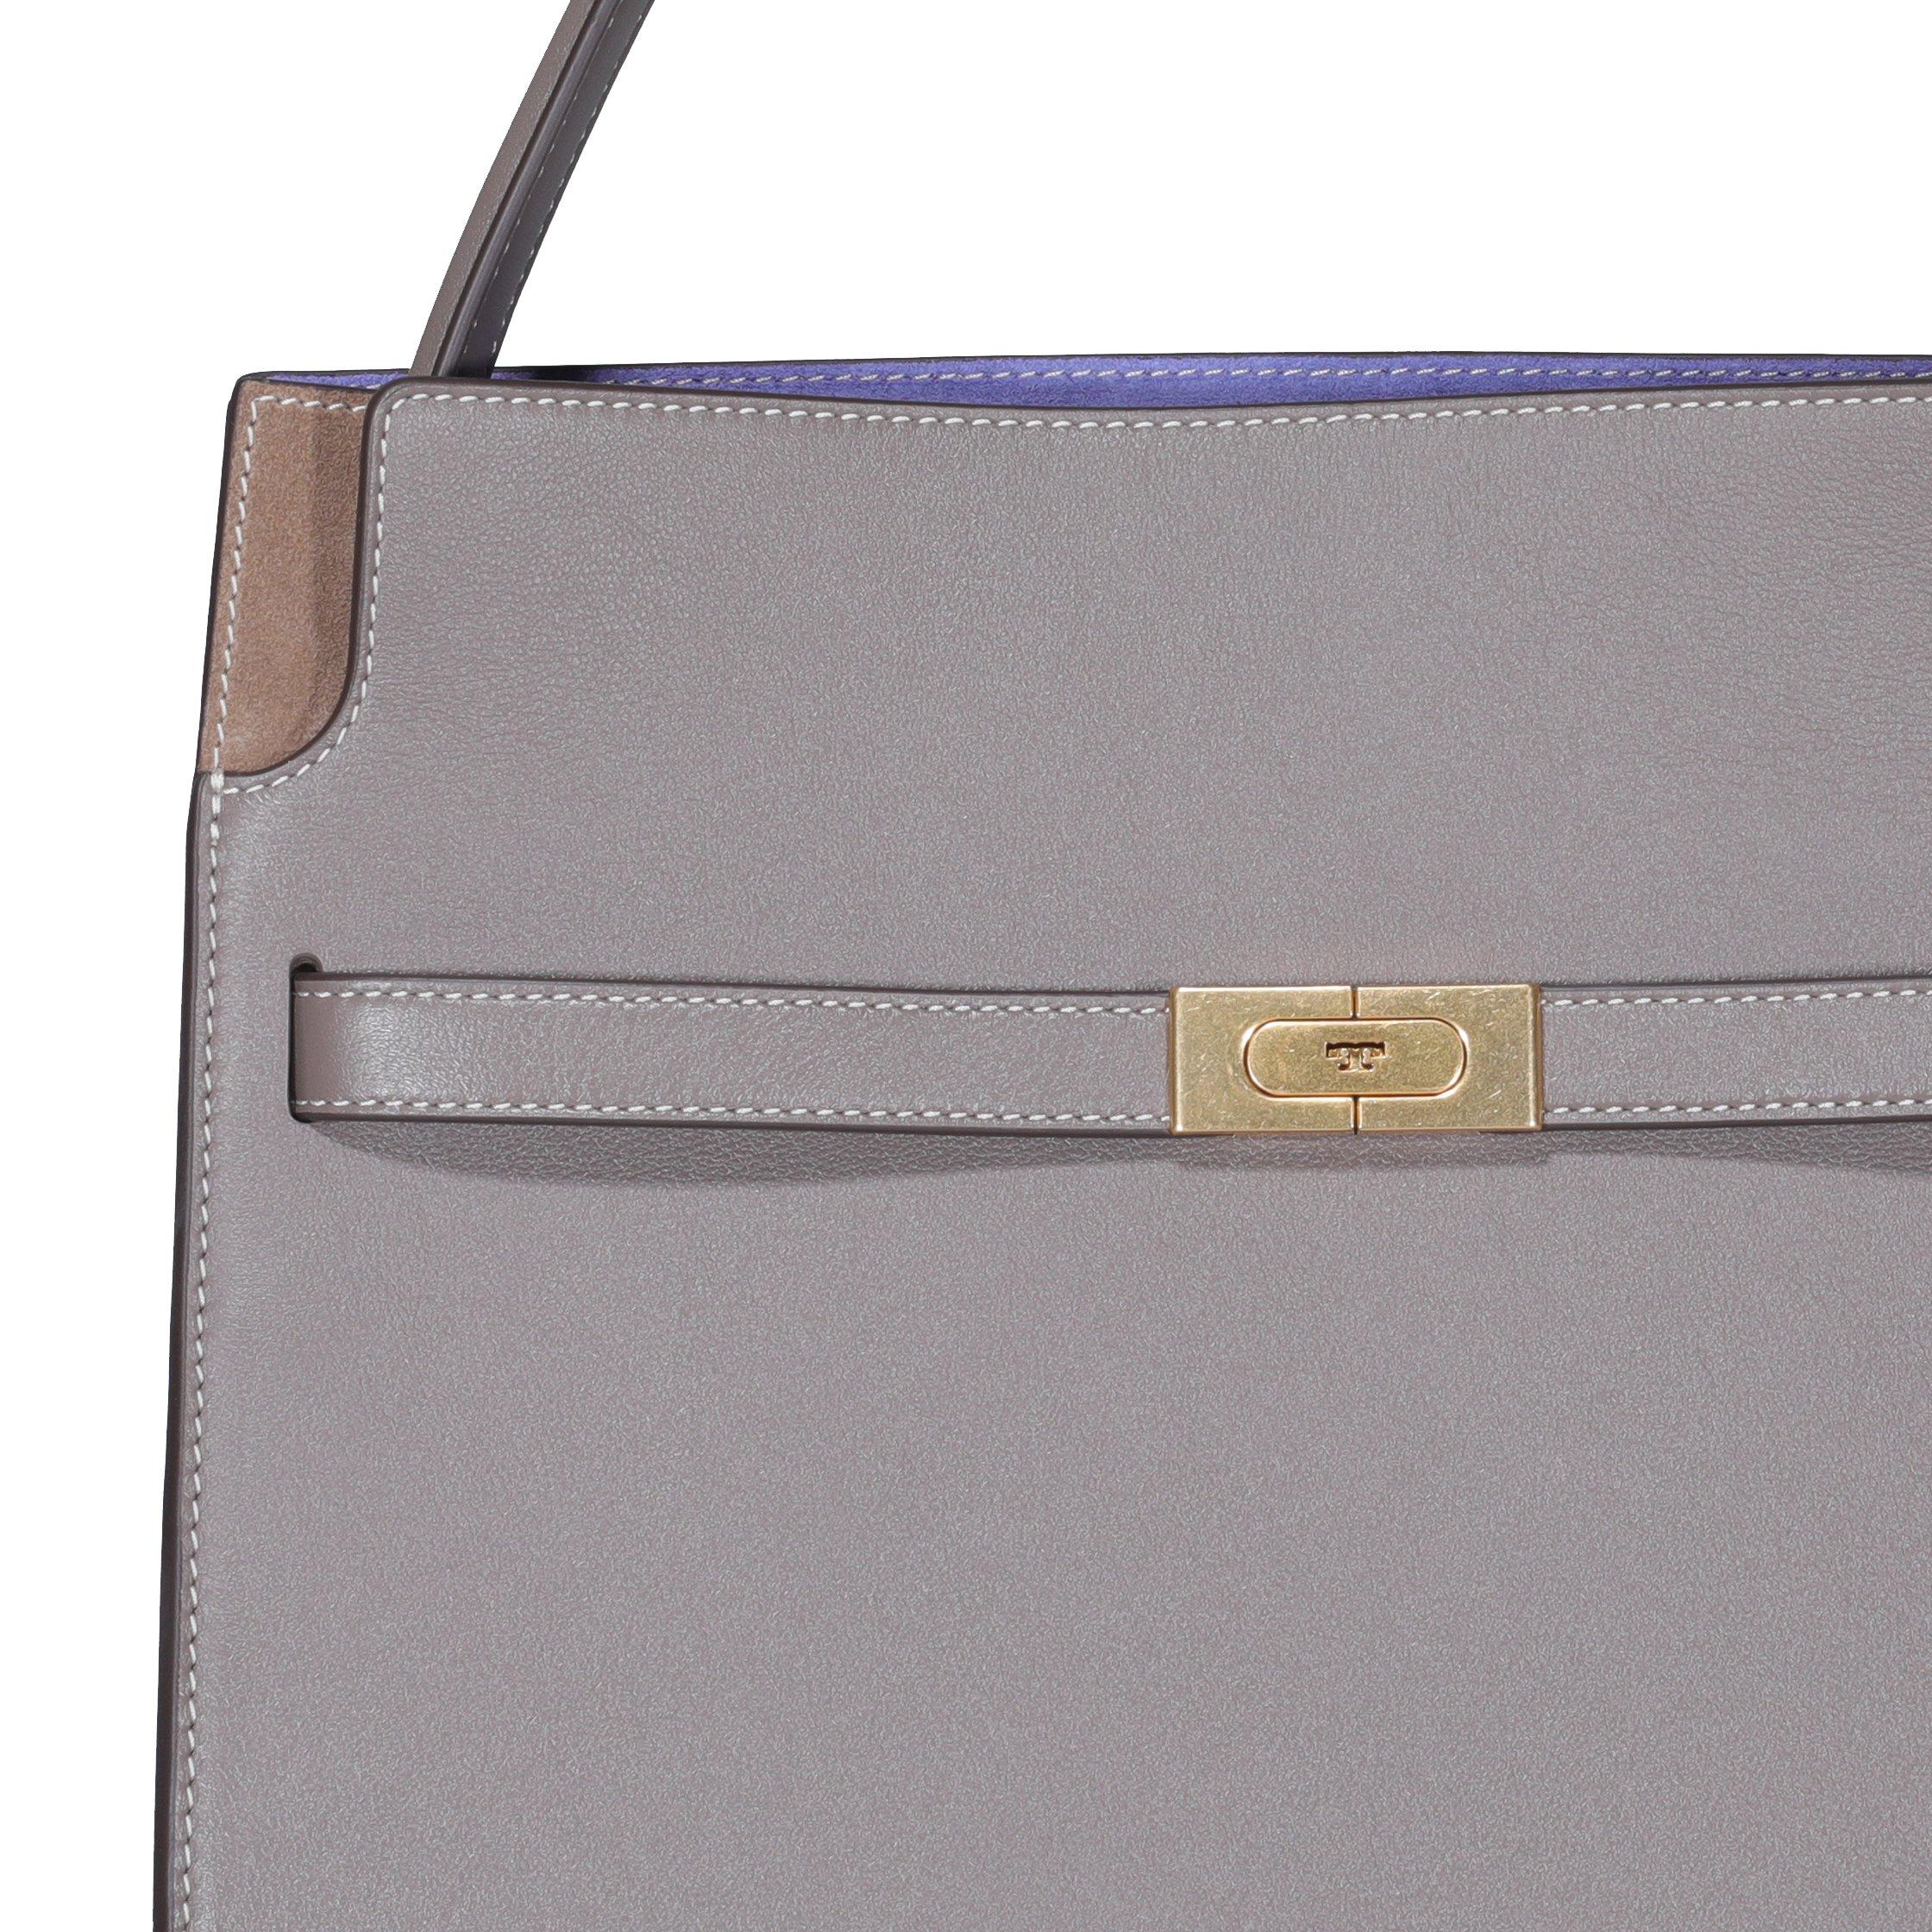 Tory Burch Lee Radziwill Double Tote Bag in Grey